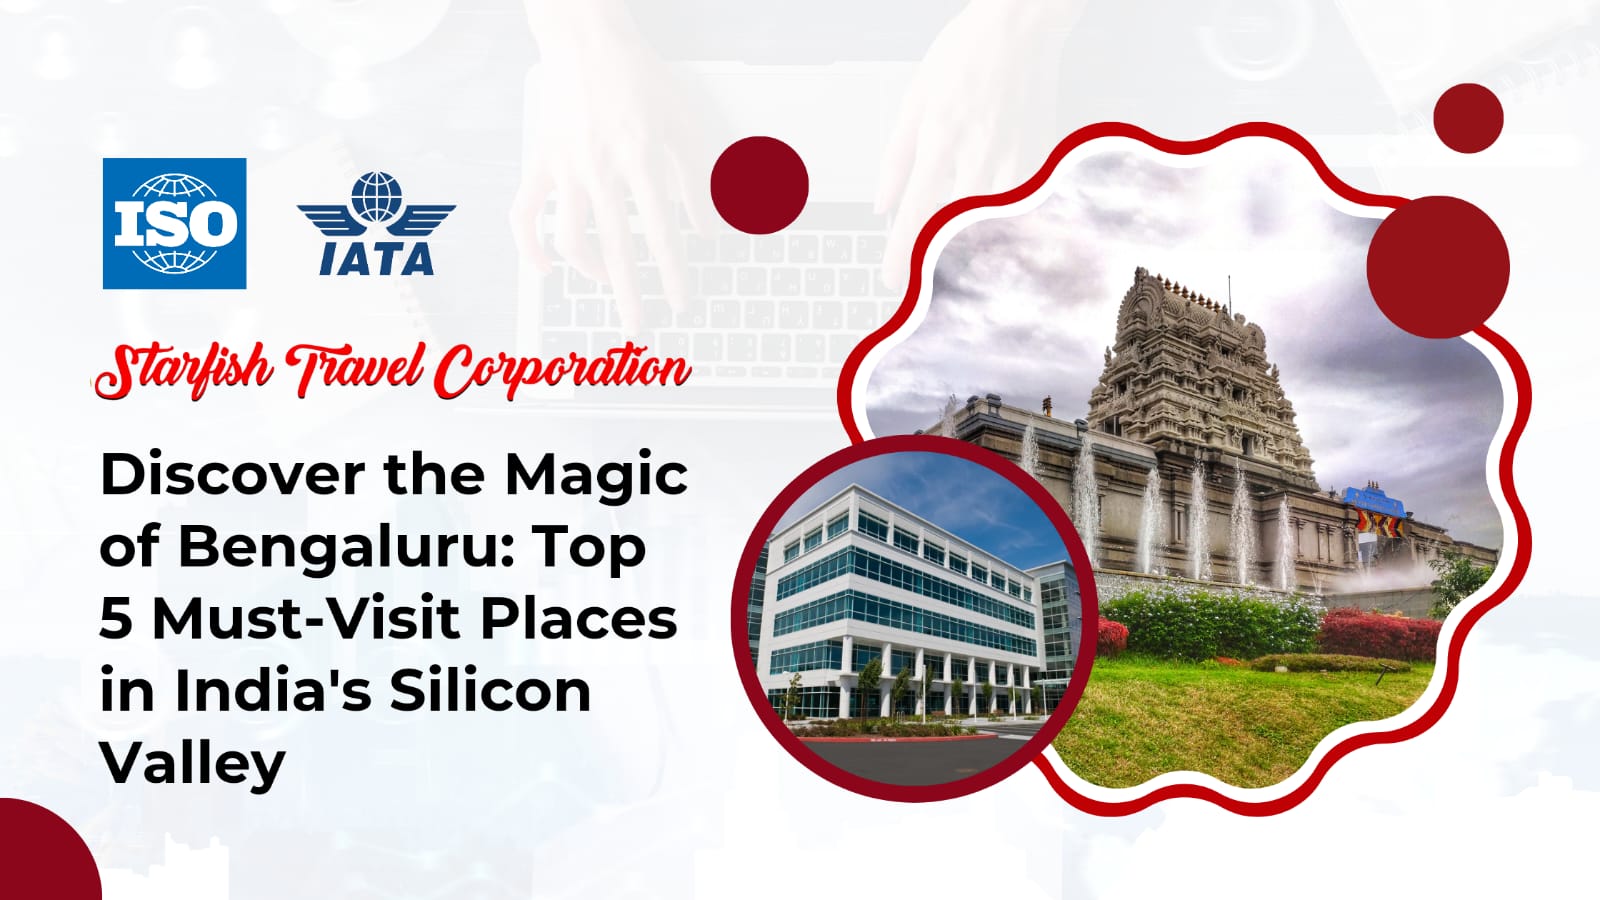 Discover the Magic of Bengaluru: Top 5 Must-Visit Places in India’s Silicon Valley